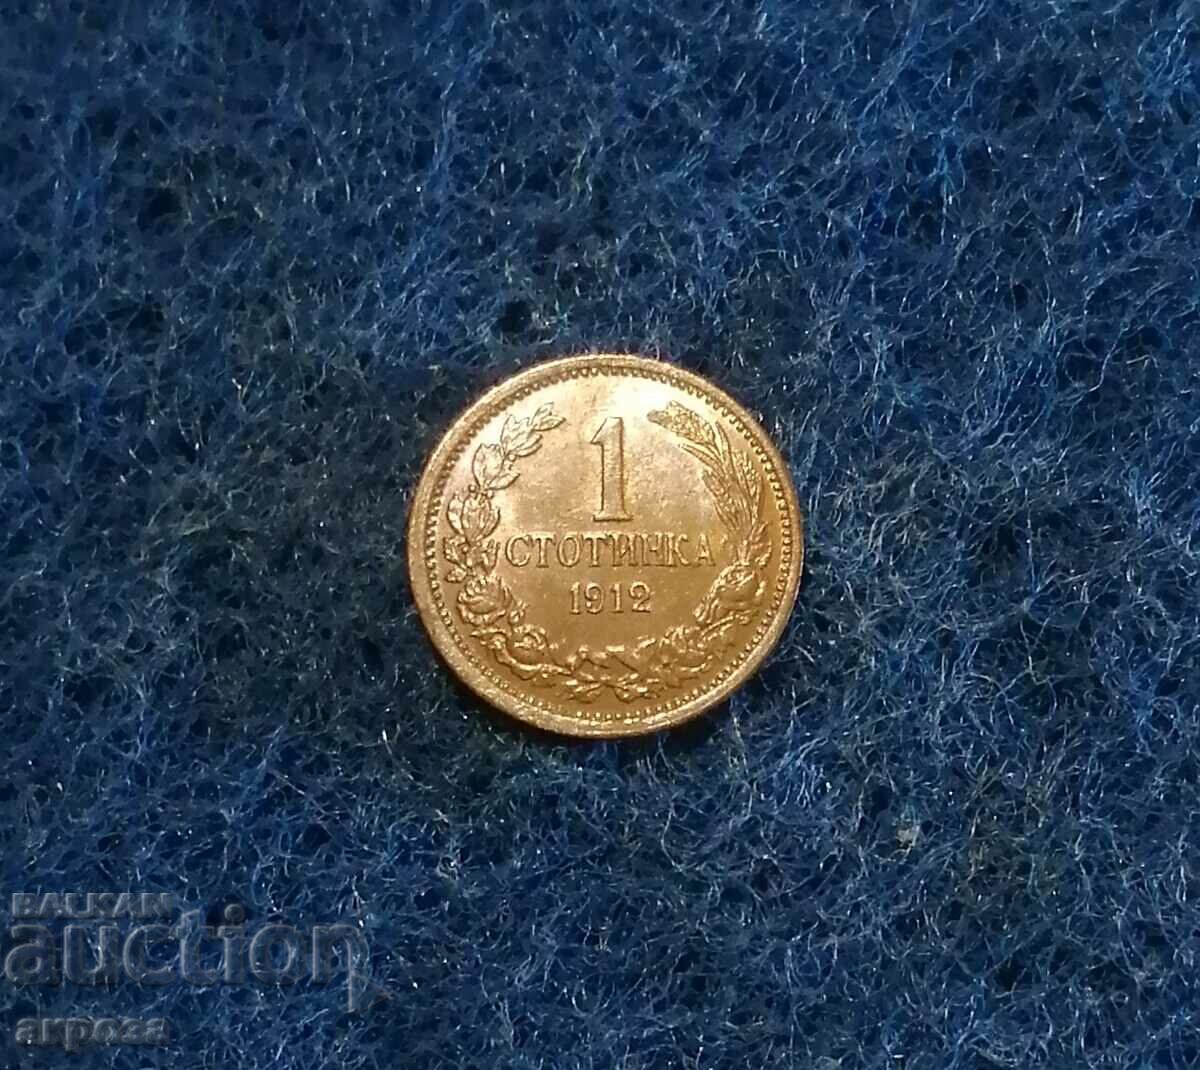 1 cent 1912 UNCIRCULATED!